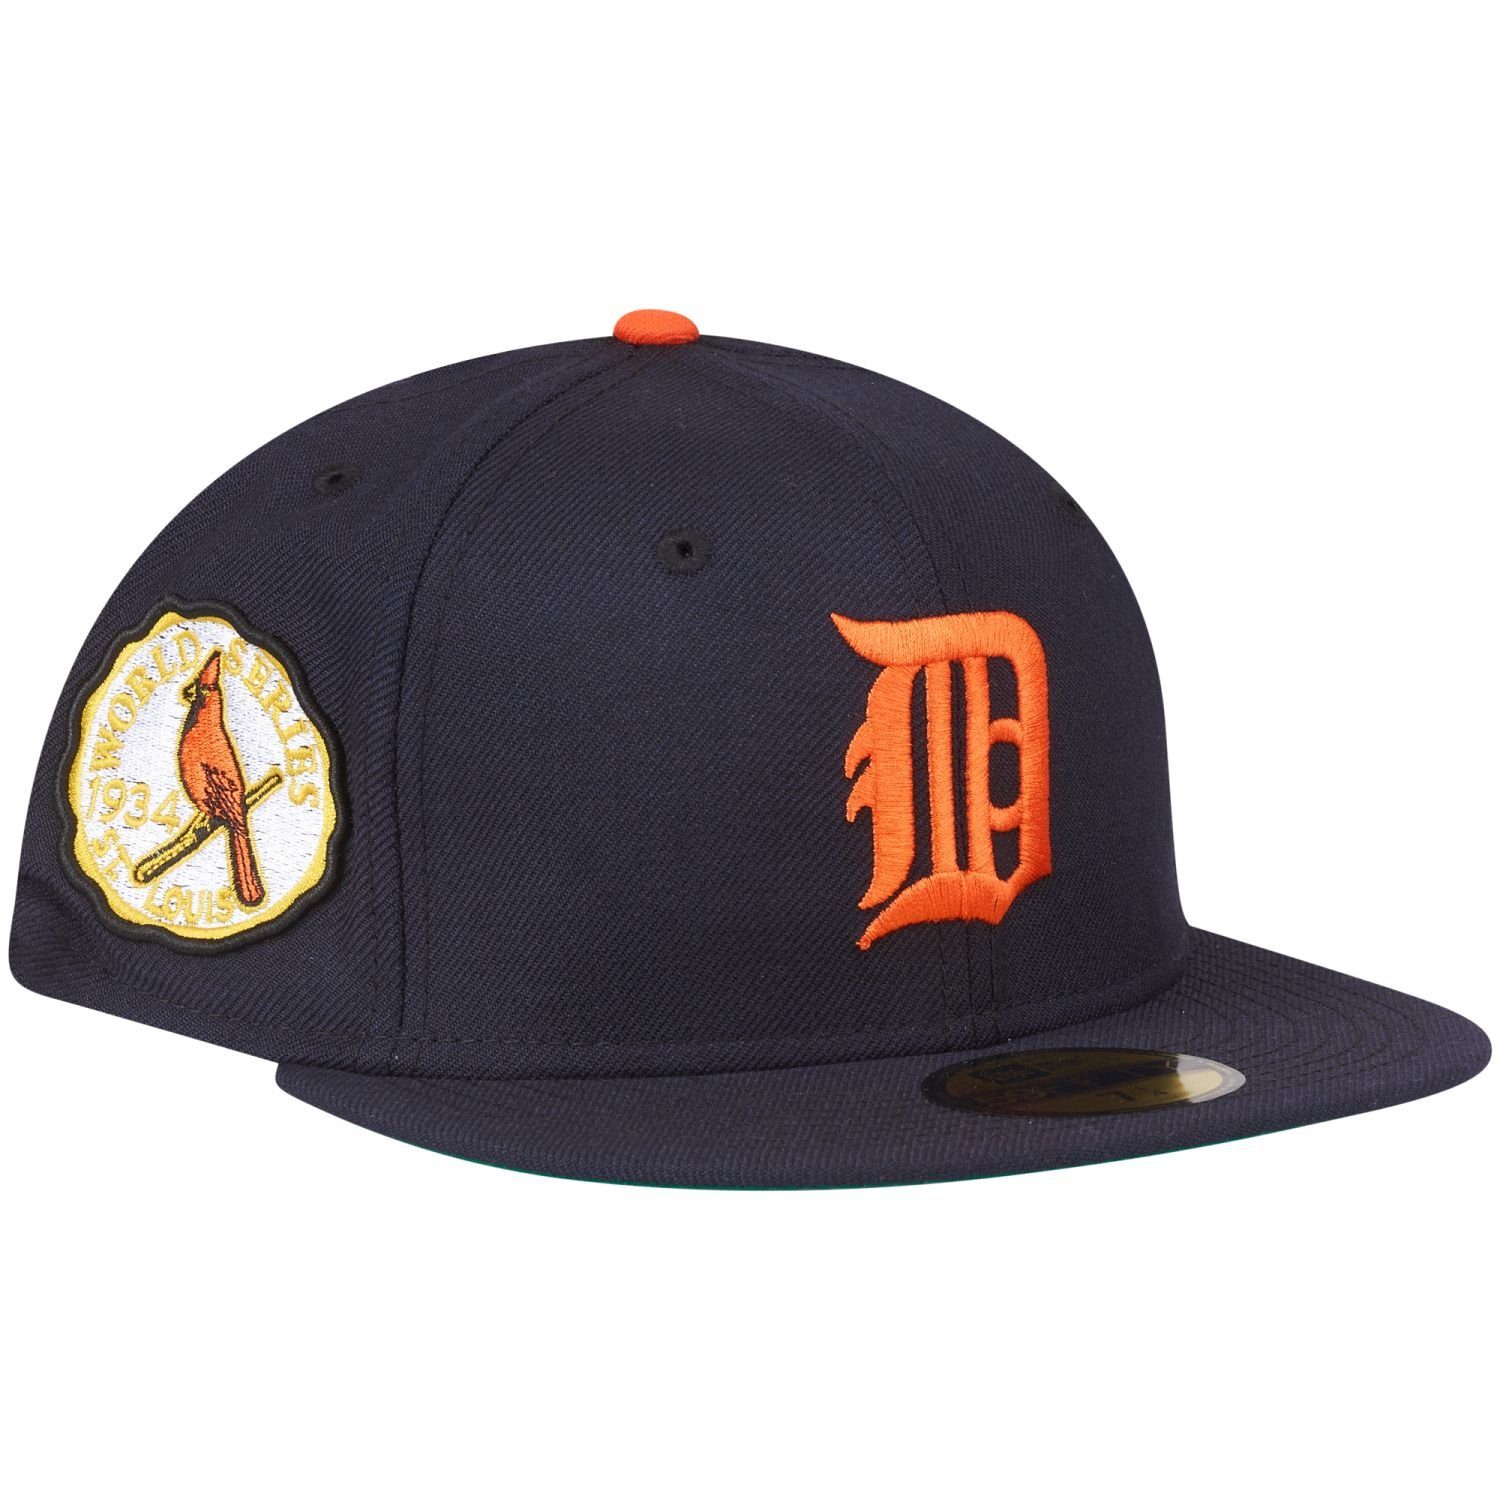 New Era Fitted Cap 59Fifty COOPERSTOWN 1934 Detroit Tigers